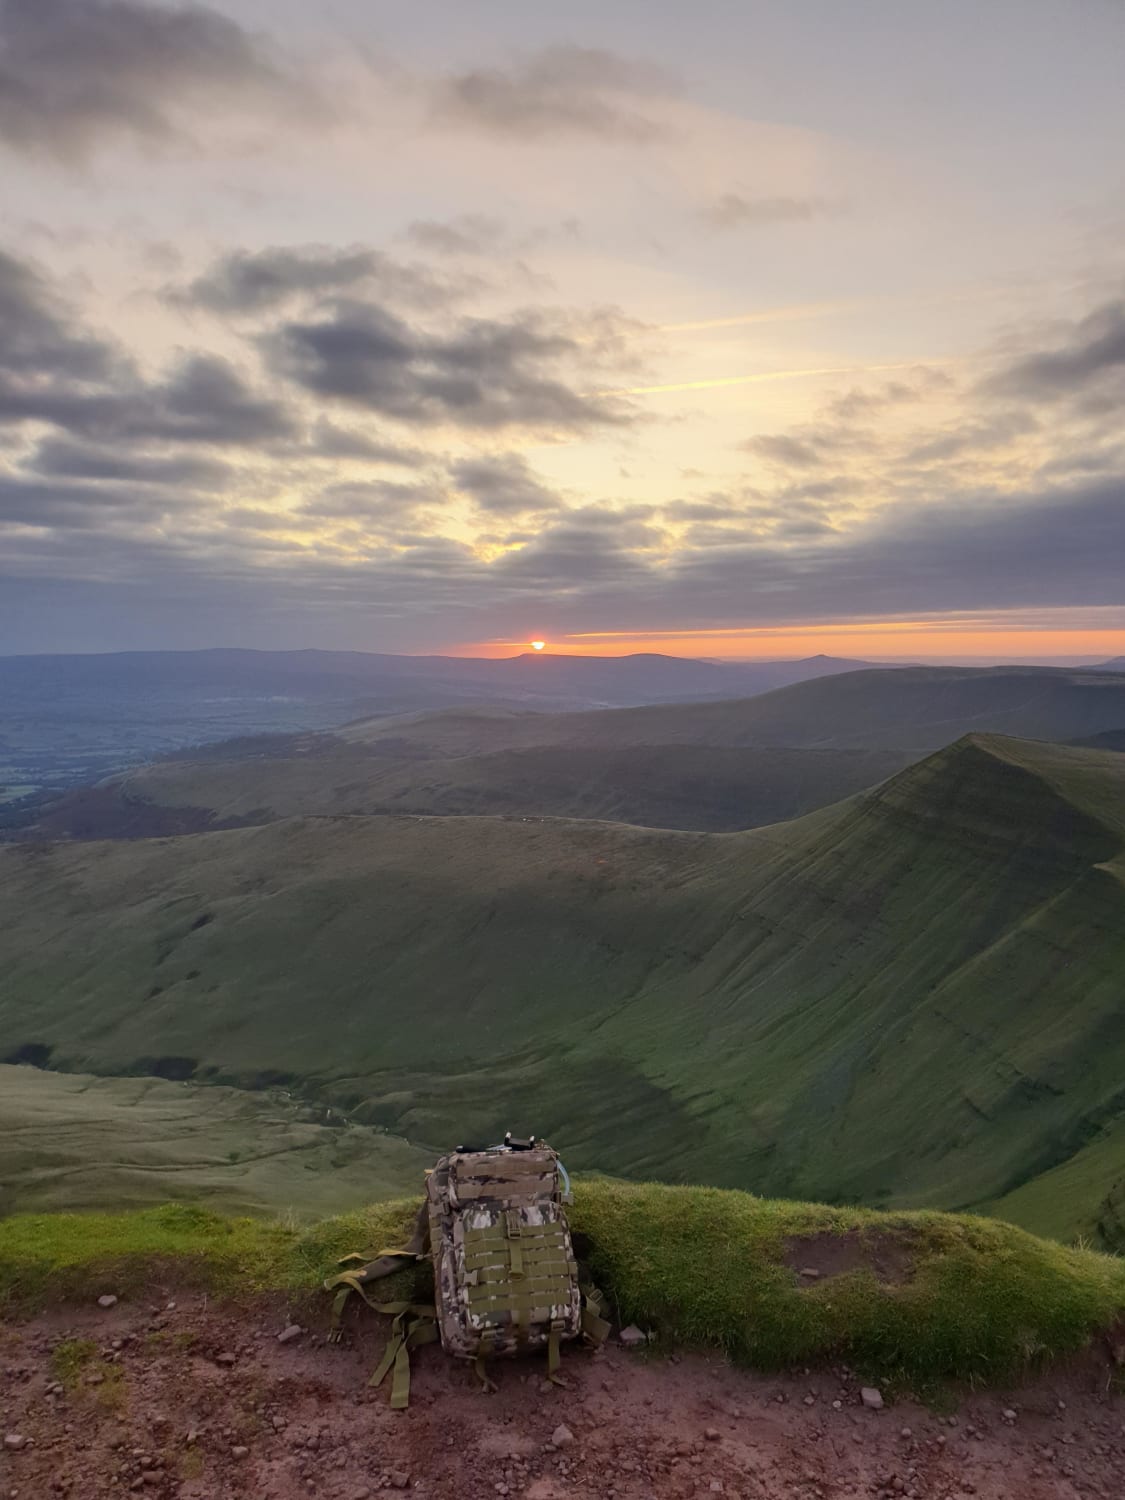 An early morning hike to catch the sun on Pen y fan in Wales the other day, with Cribyn in the foreground